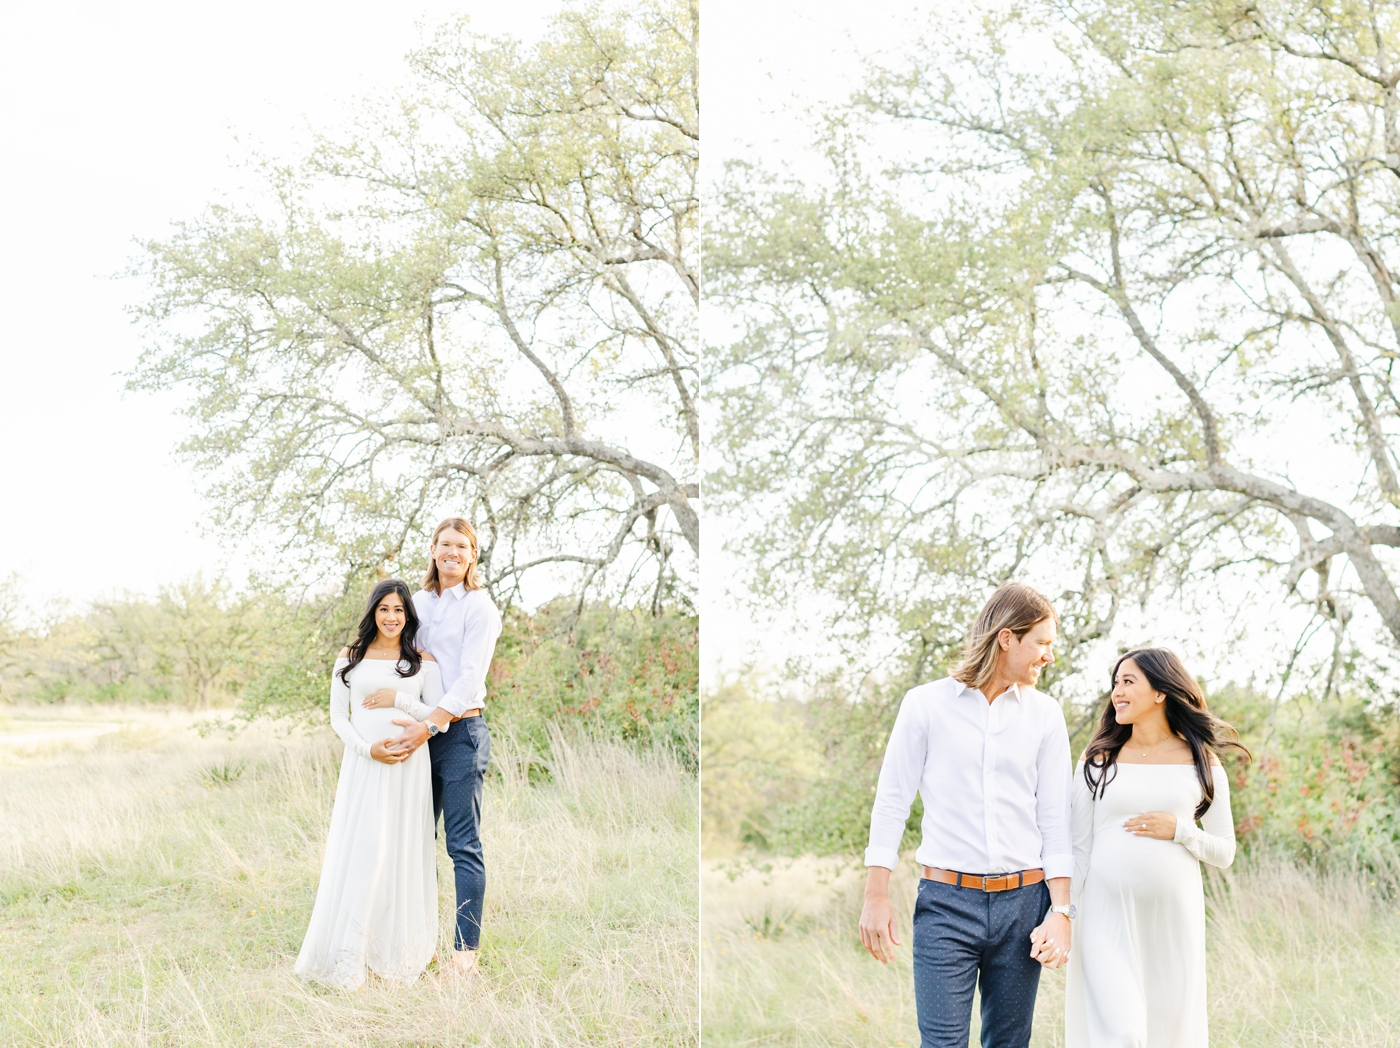 Happy couple smiling during maternity session in Round Rock Texas. Photos by Sana Ahmed Photography.